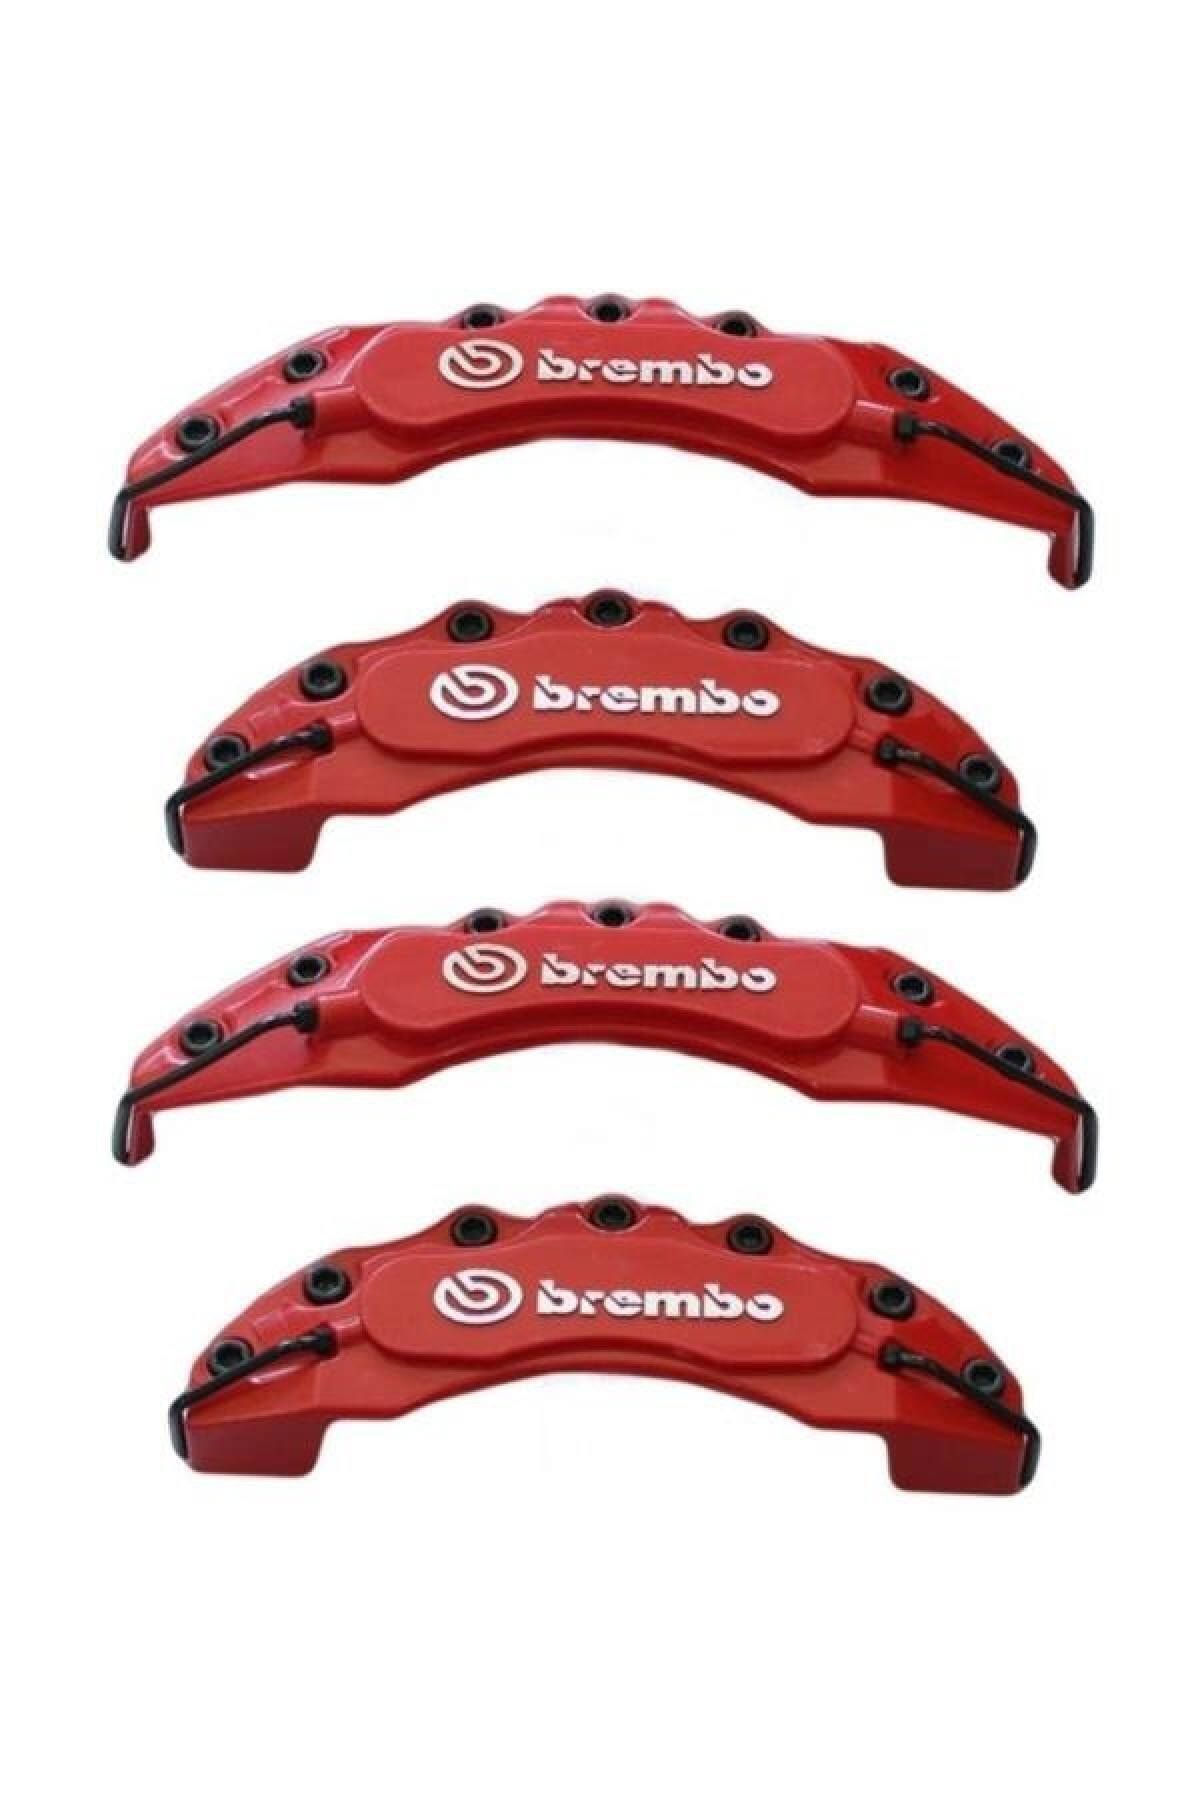 Brembo Yellow Car Accessories Styles, Prices - Trendyol